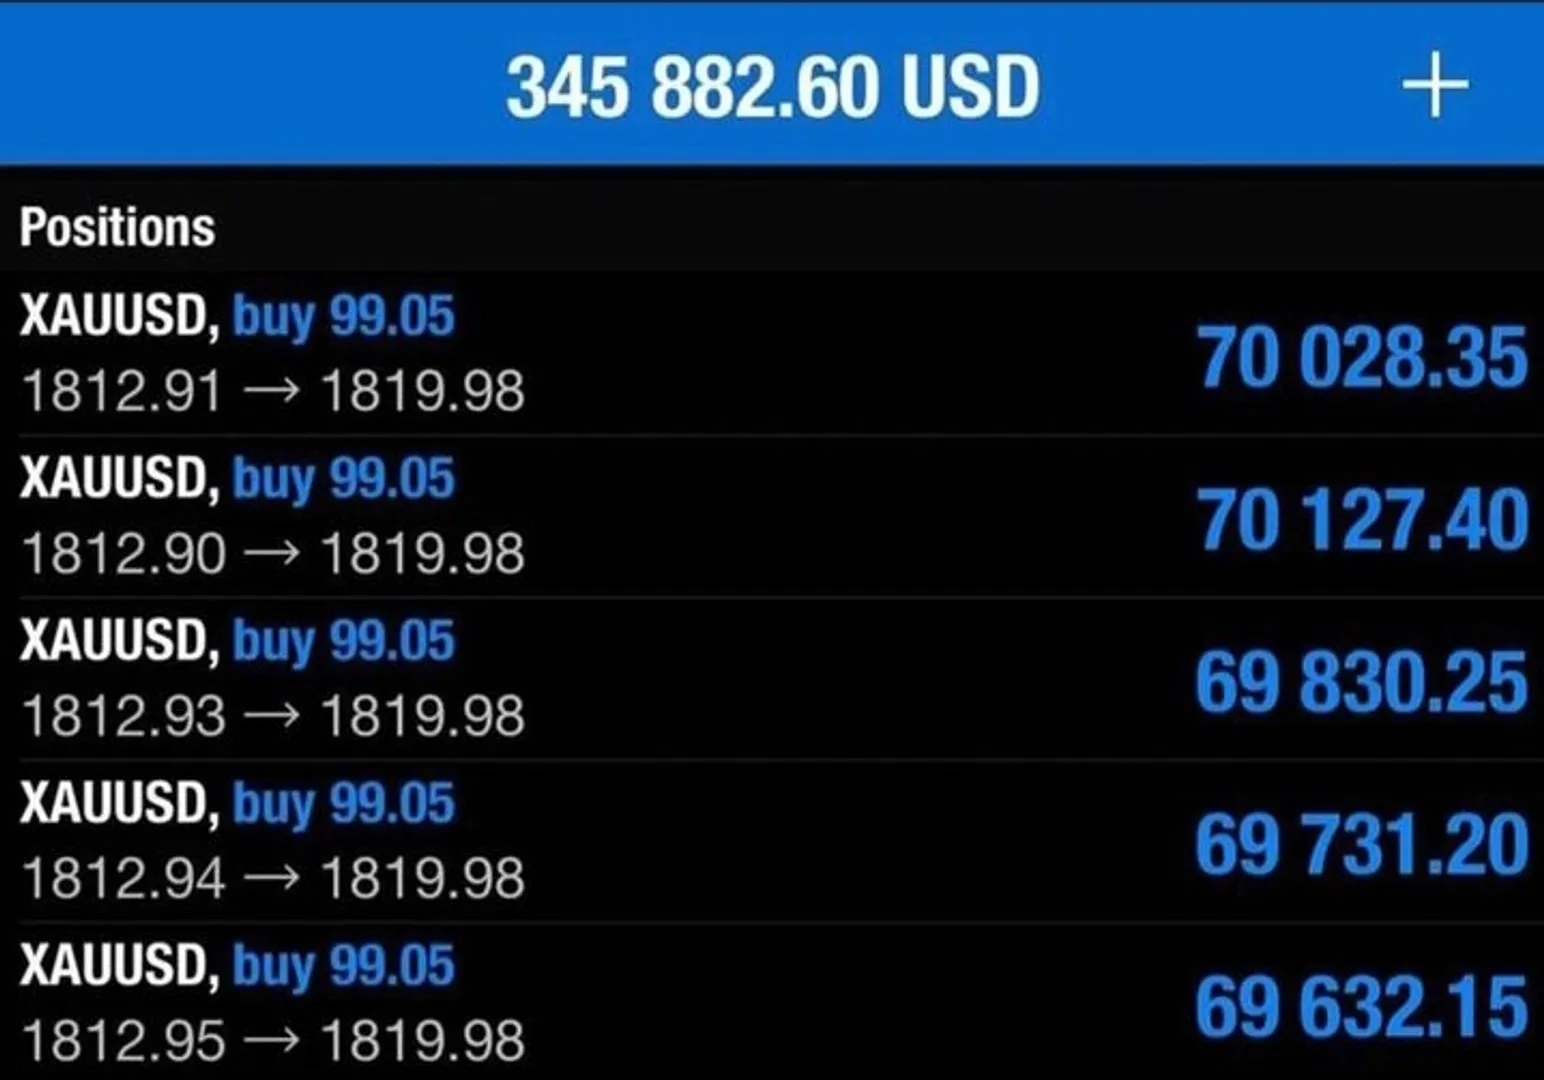 I will help you manage your funded forex account with 95% accuracy but the you will pay 30% of the weekly profits 